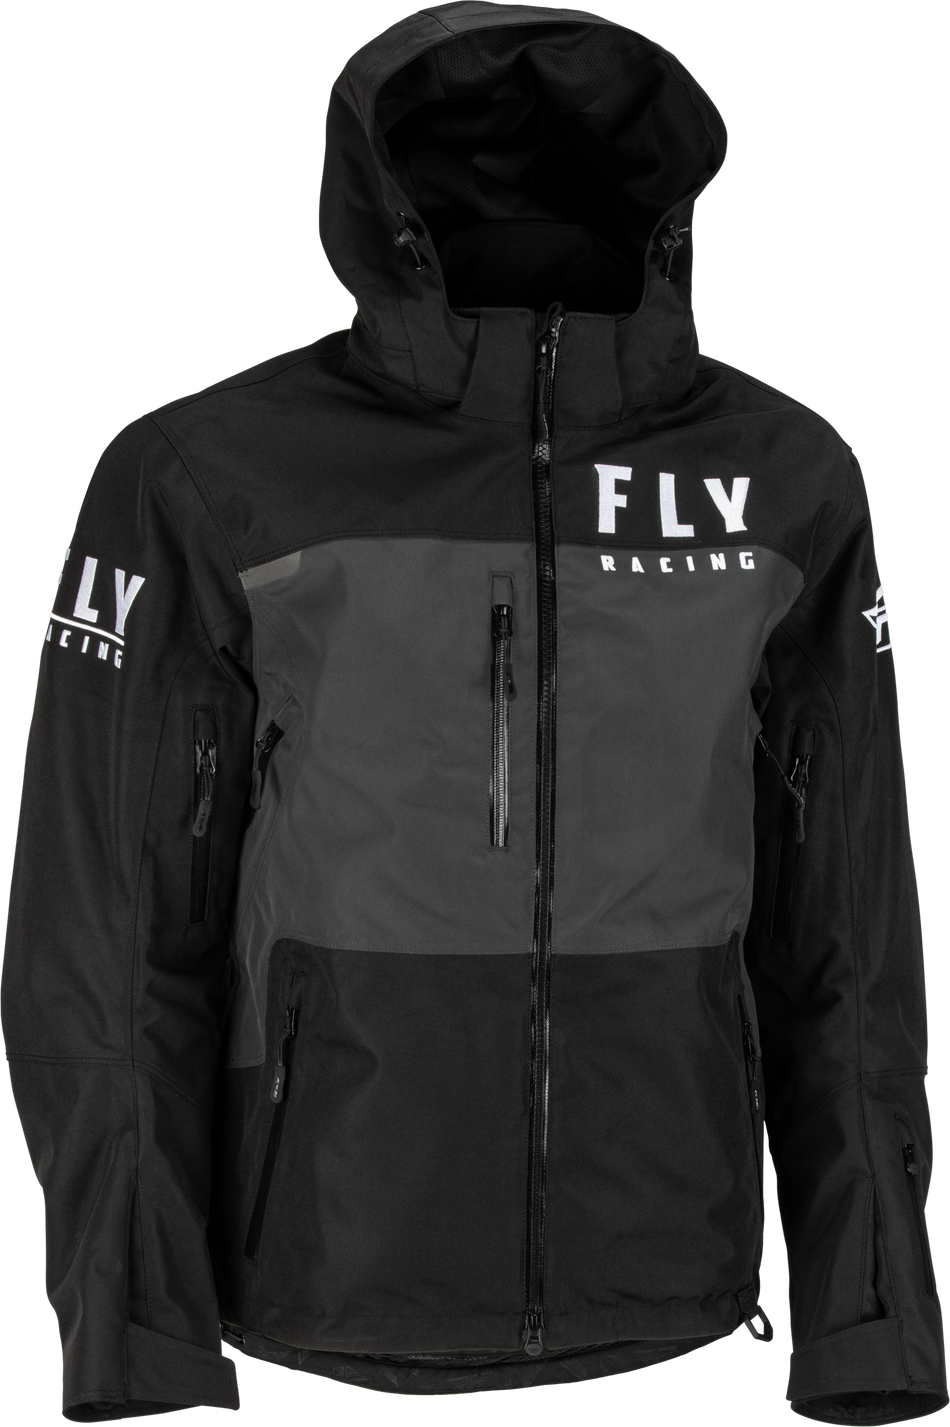 FLY RACING Carbon Jacket Black/Grey Md 470-4133M